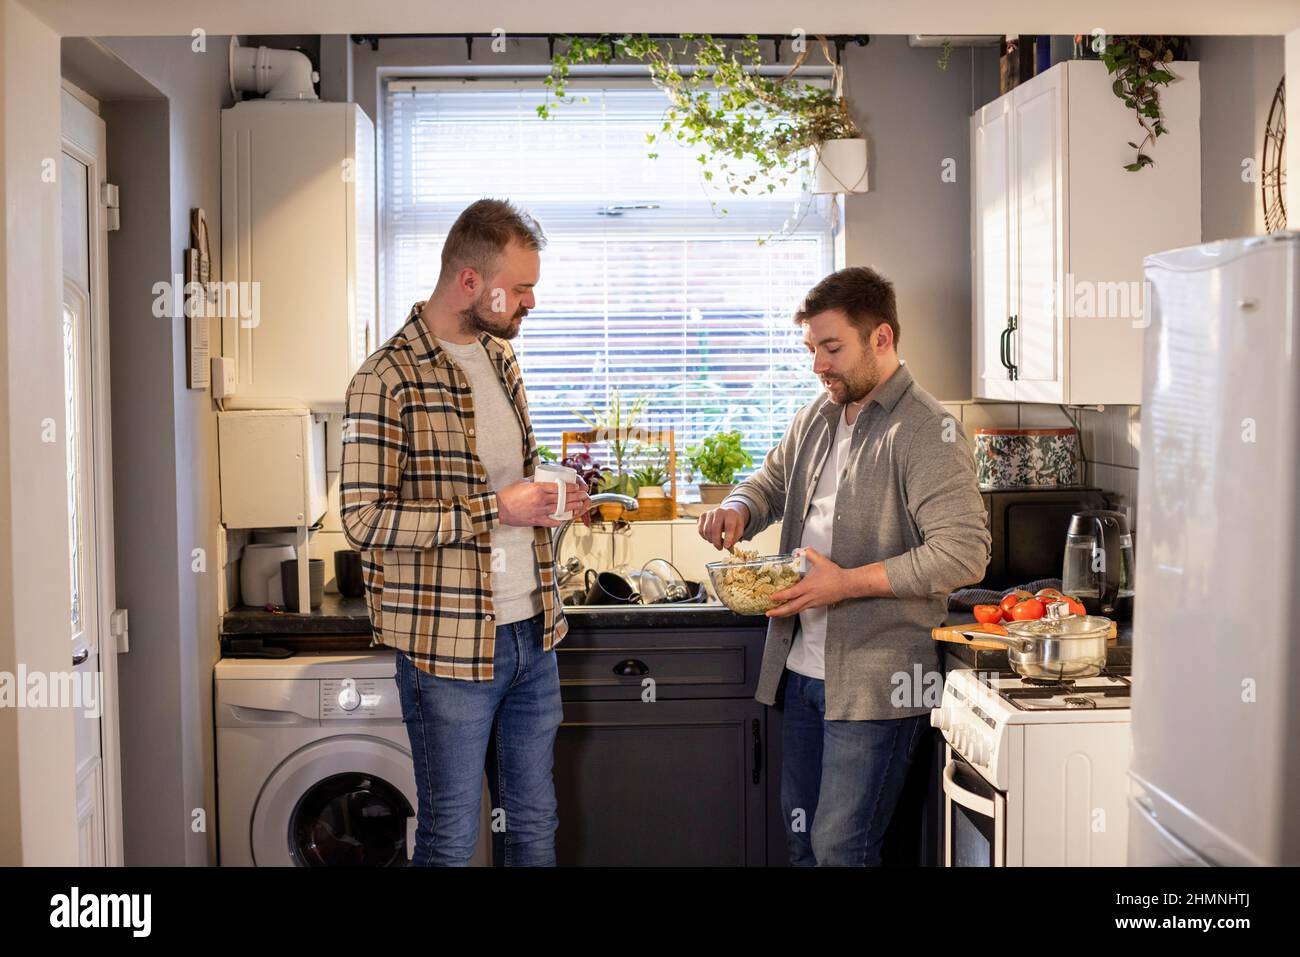 A side-view shot of an LGBTQI same sex male couple standing in their kitchen together, one man is making pasta while the other man talks to him. Stock Photo